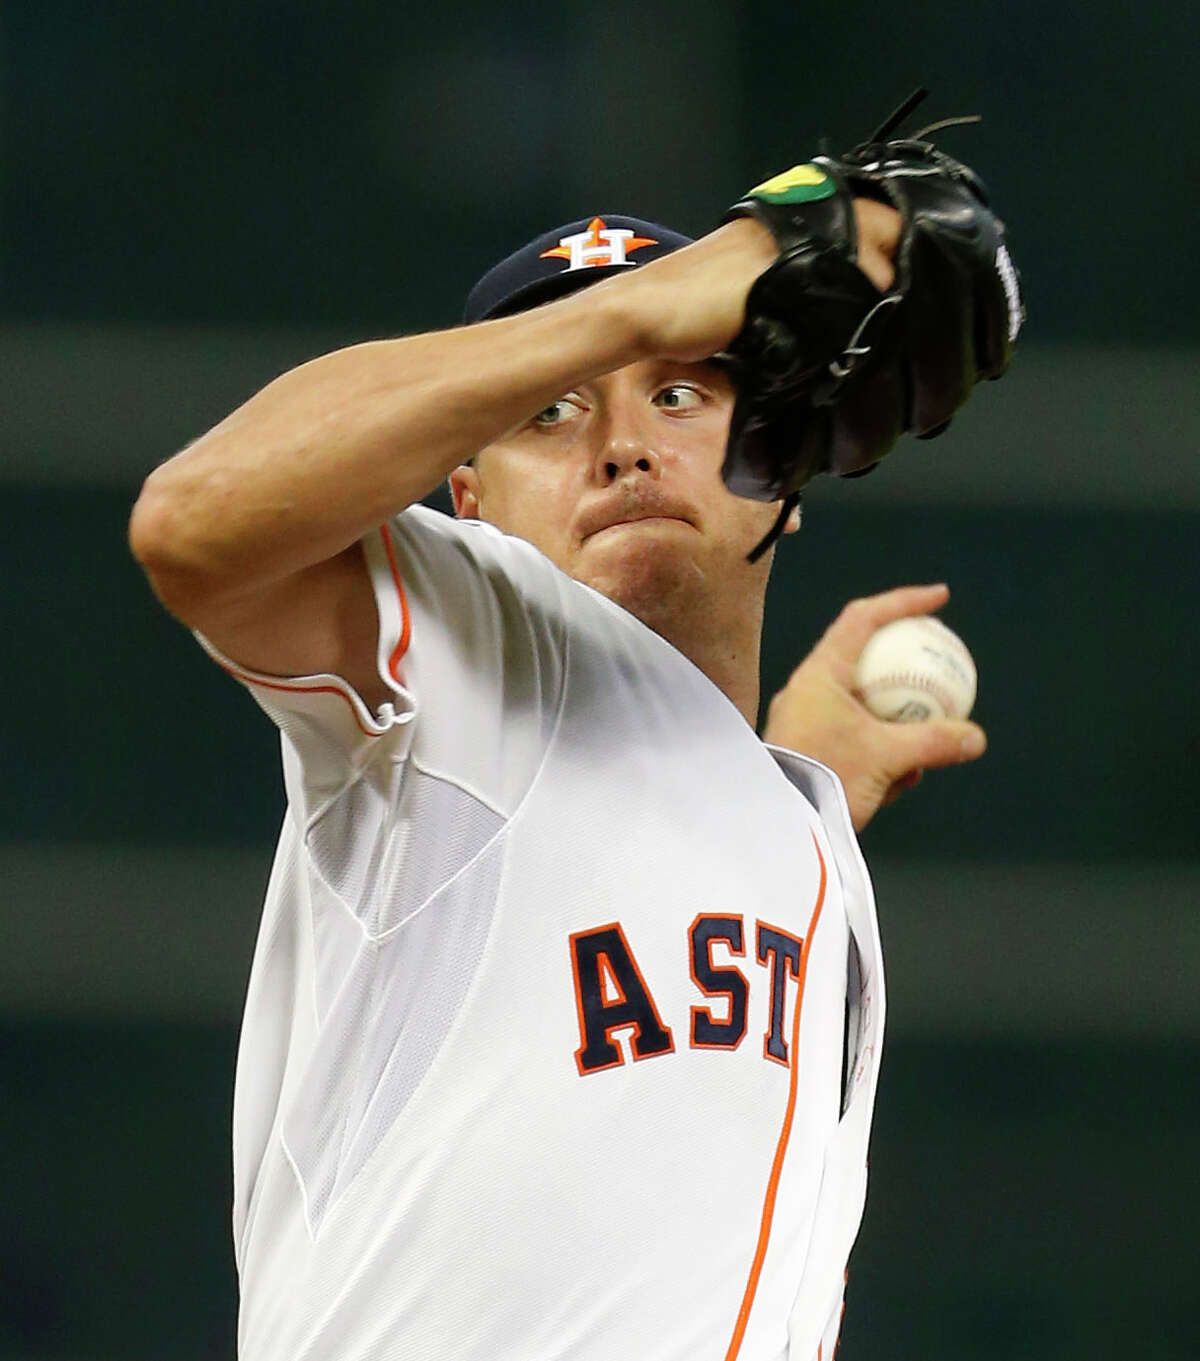 Scott Kazmir is 2-3 since coming to the Astros in a July 23 trade with Oakland but has a 2.41 ERA that ranks 12th in the majors in that span. For the season overall, he is 7-8 with a 2.39 ERA.